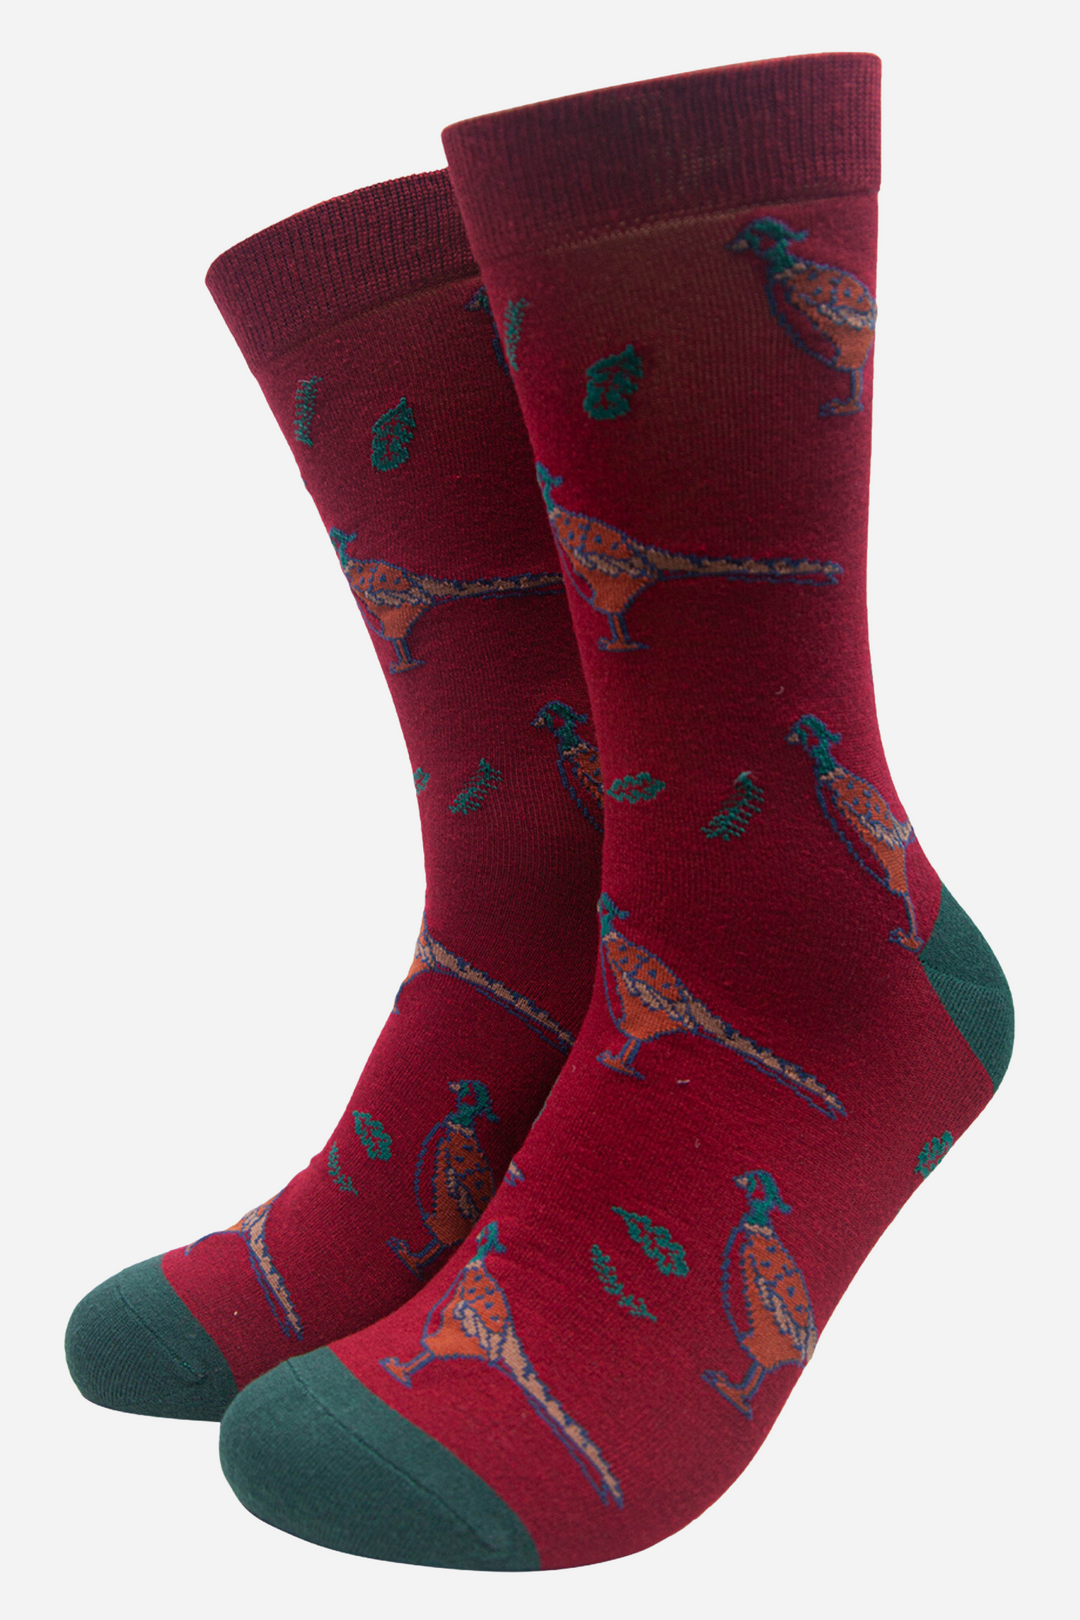 red socks with woodland pheasants and green leaves